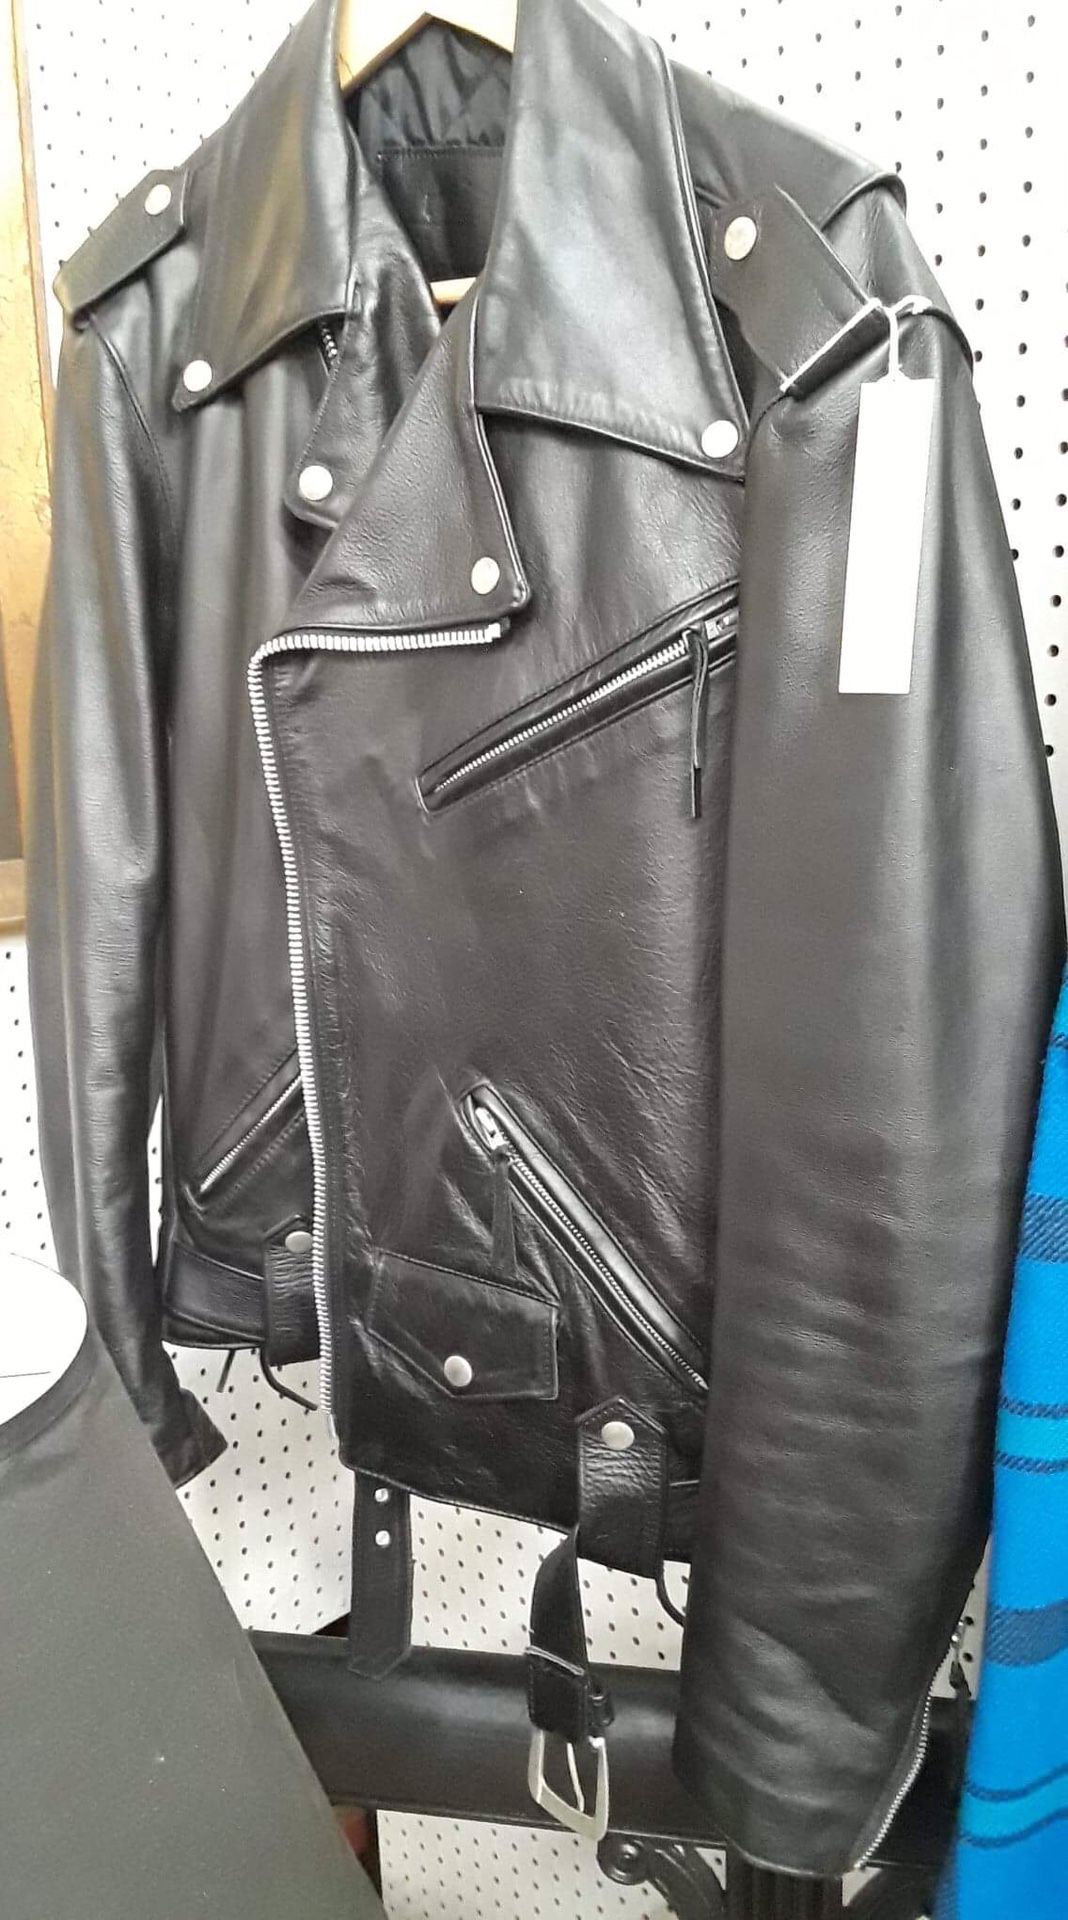 Harley Davidson motorcycle jacket. Great condition. Size 40L. Original price $145.00, sale price $87.00. Located at Long Beach Antique Mall 2 1851 F